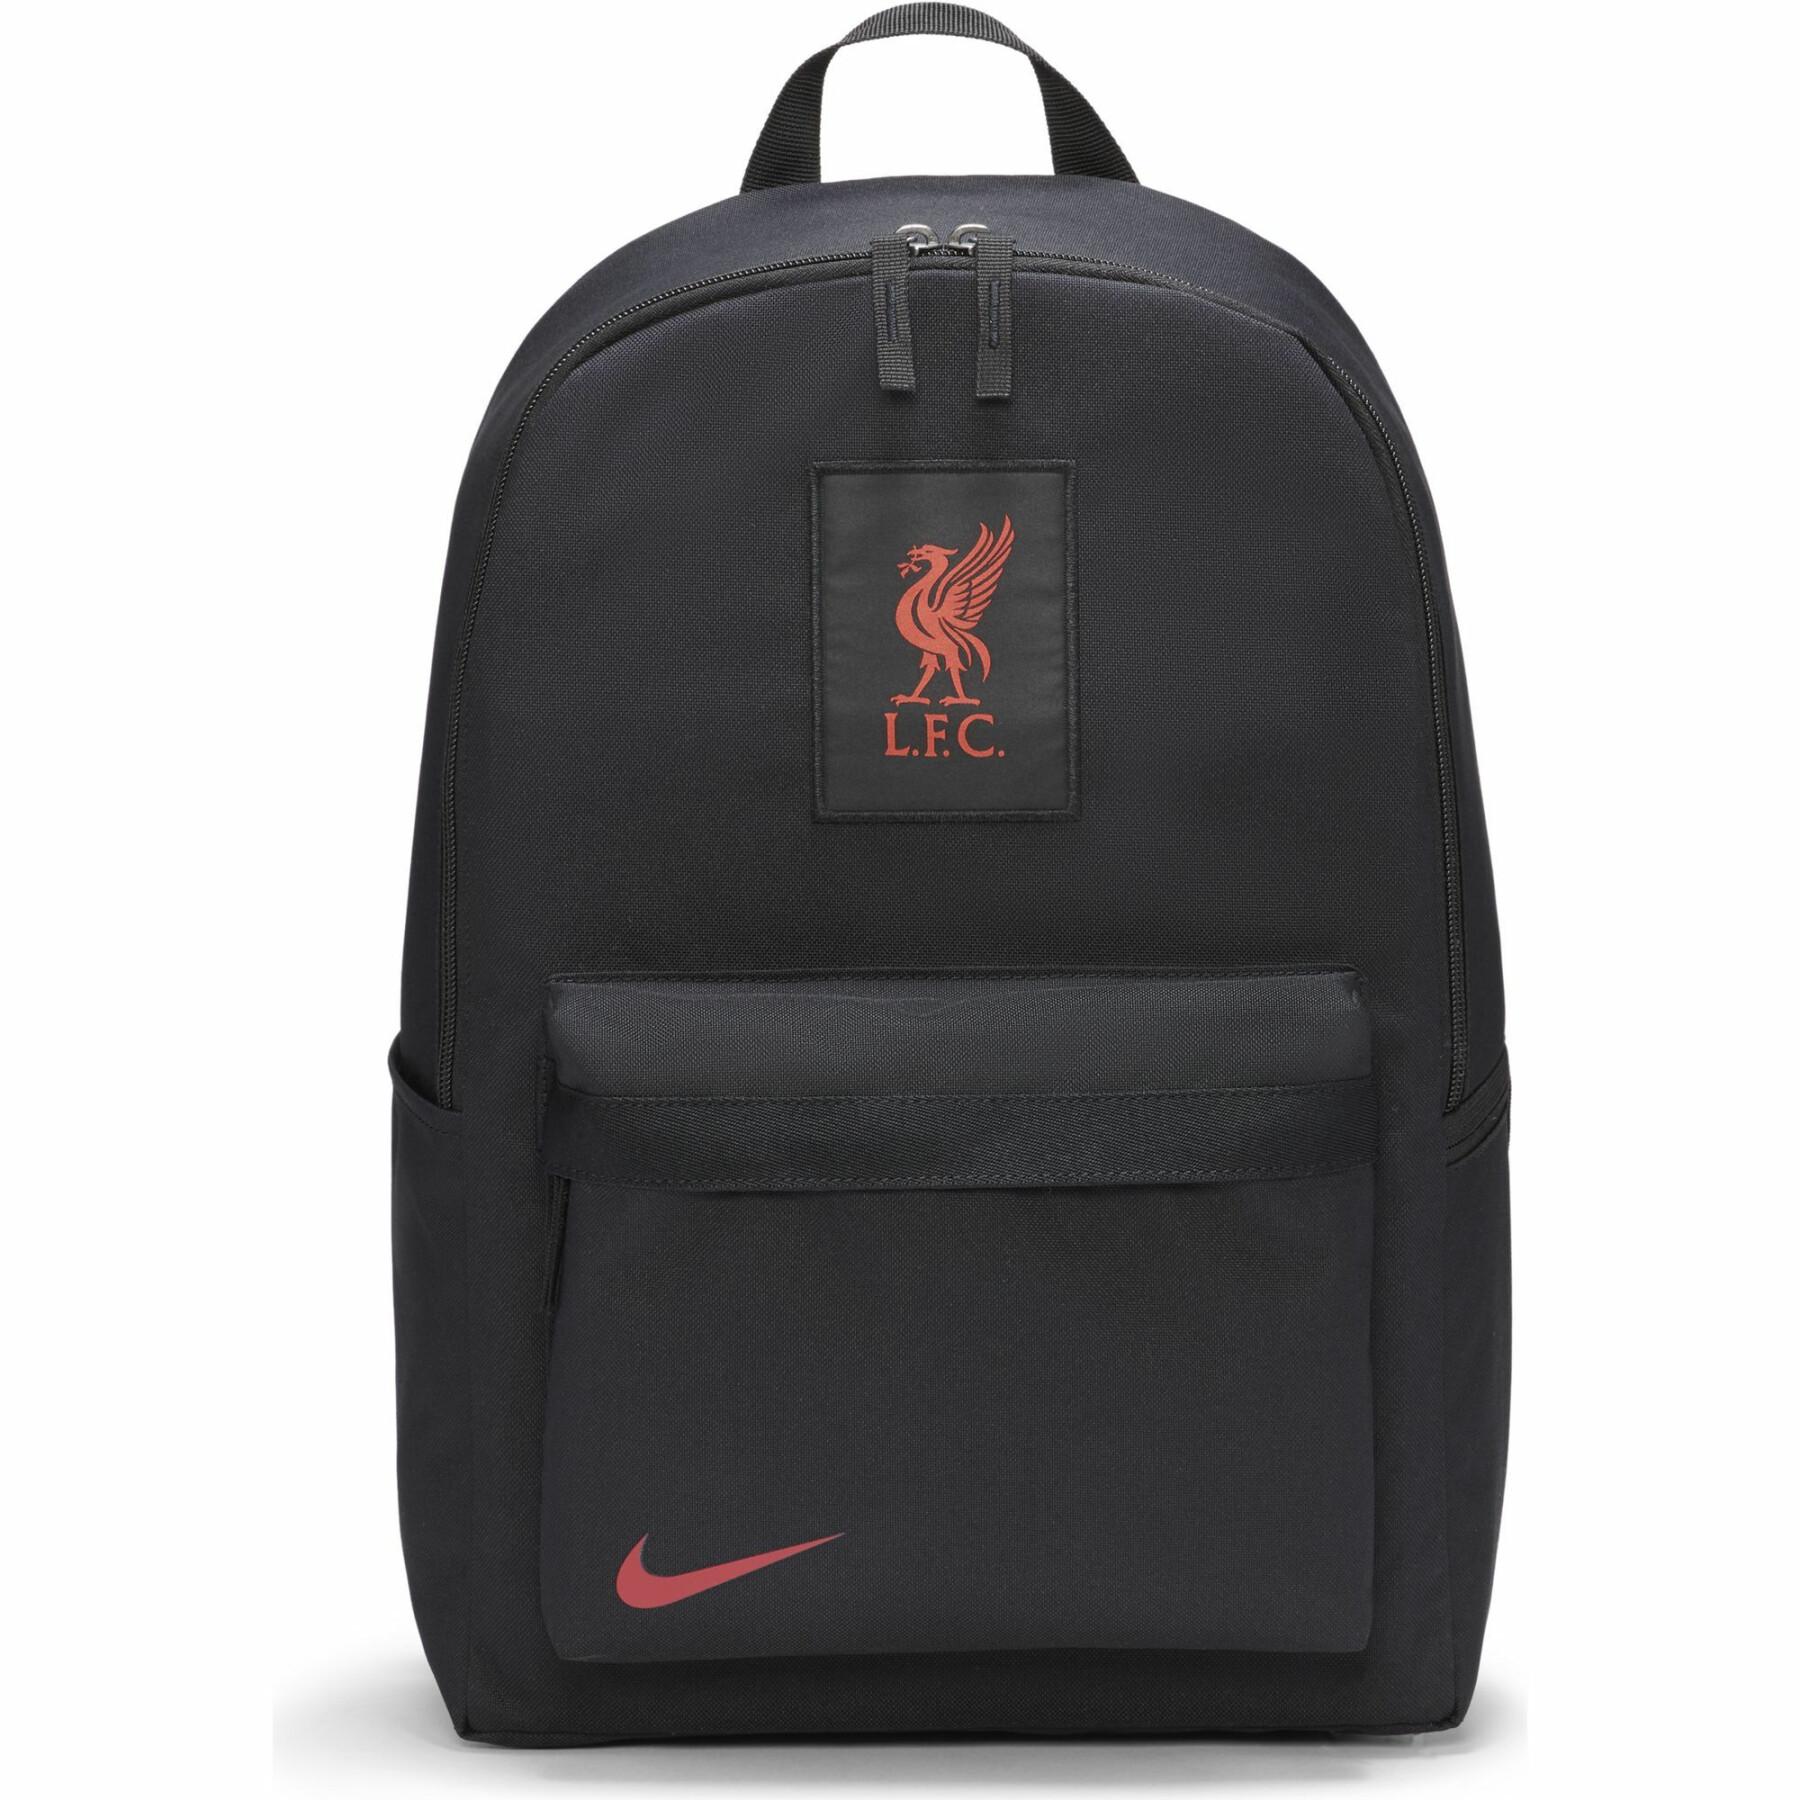 Backpack Liverpool FC